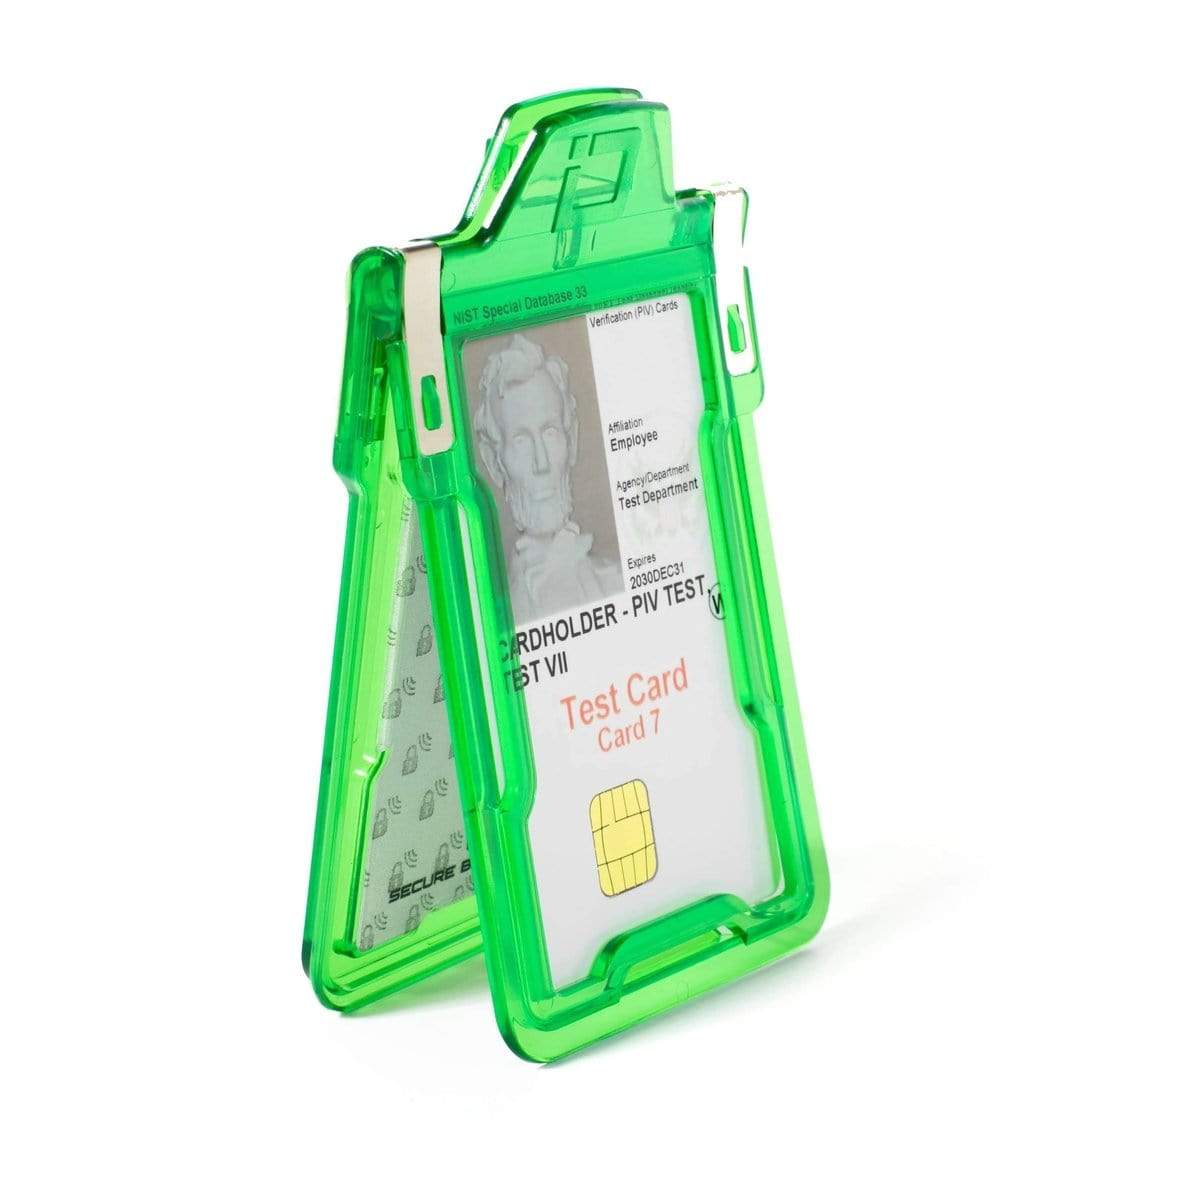 Translucent Green Identity Stronghold IDSH1004-001B-002 Secure Badgeholder Classic IDSH1004-001B-002-GRN